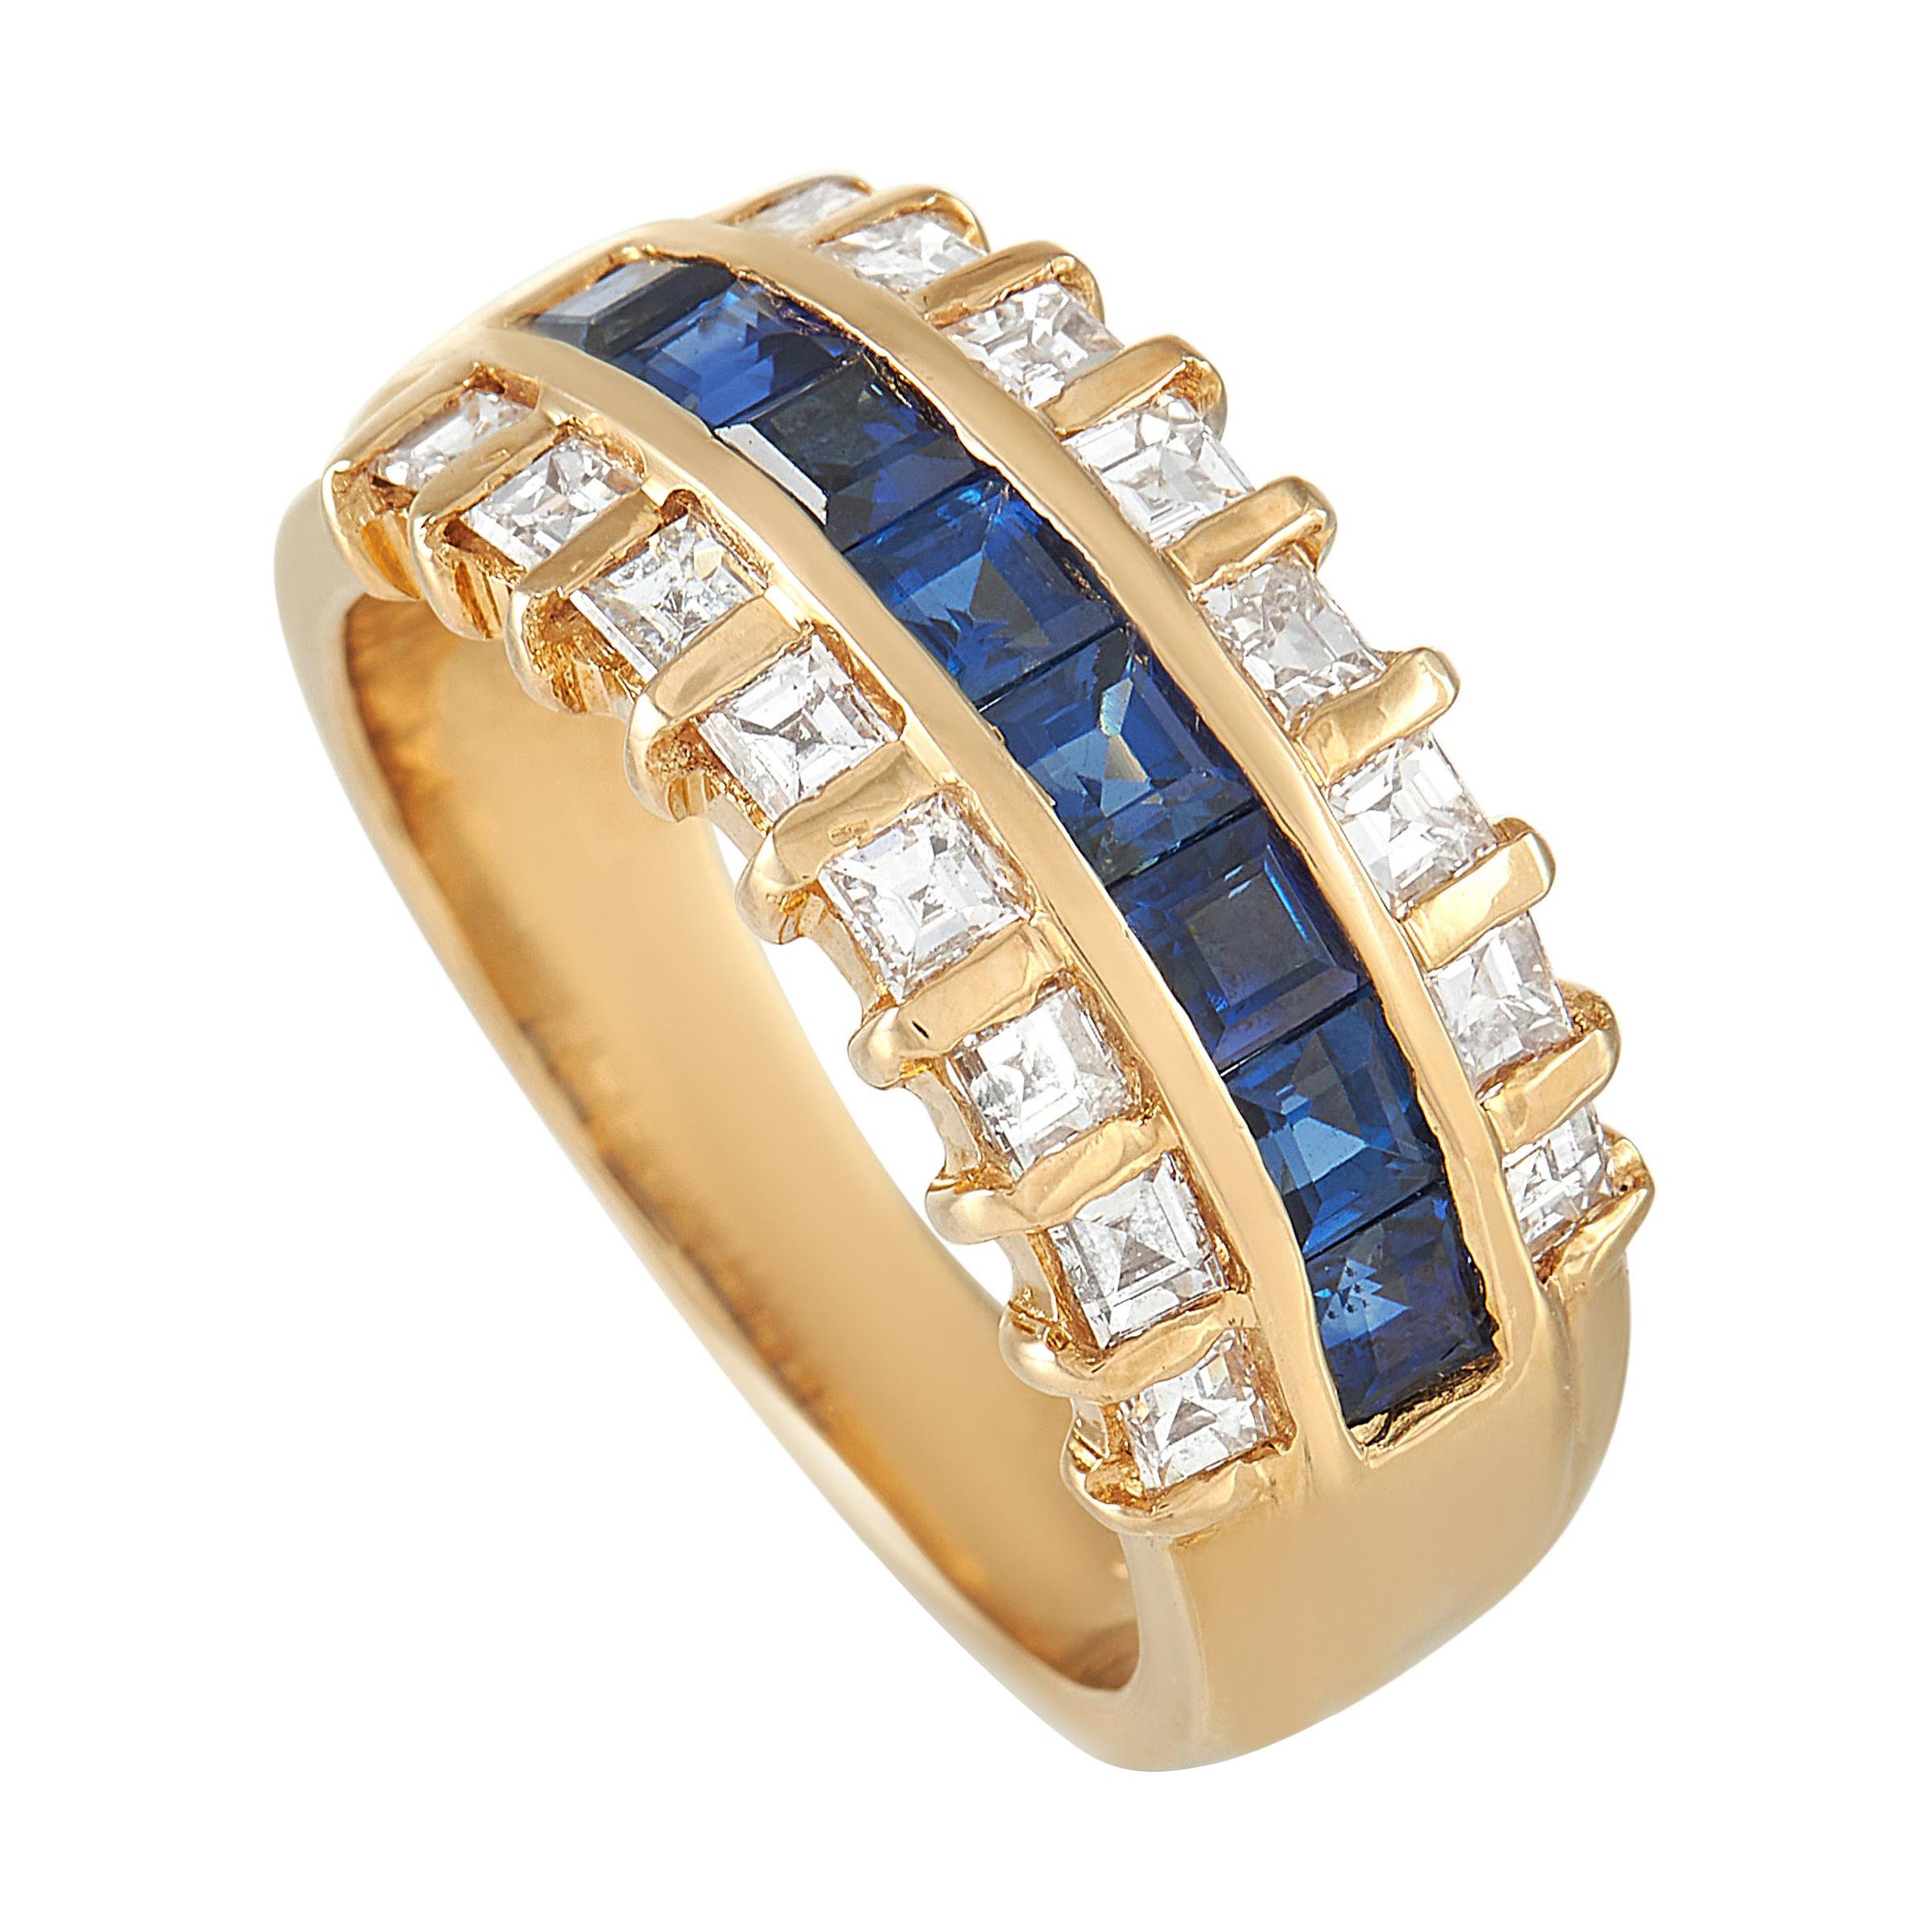 LB Exclusive 18k Yellow Gold 0.89 ct Diamond and Sapphire Ring